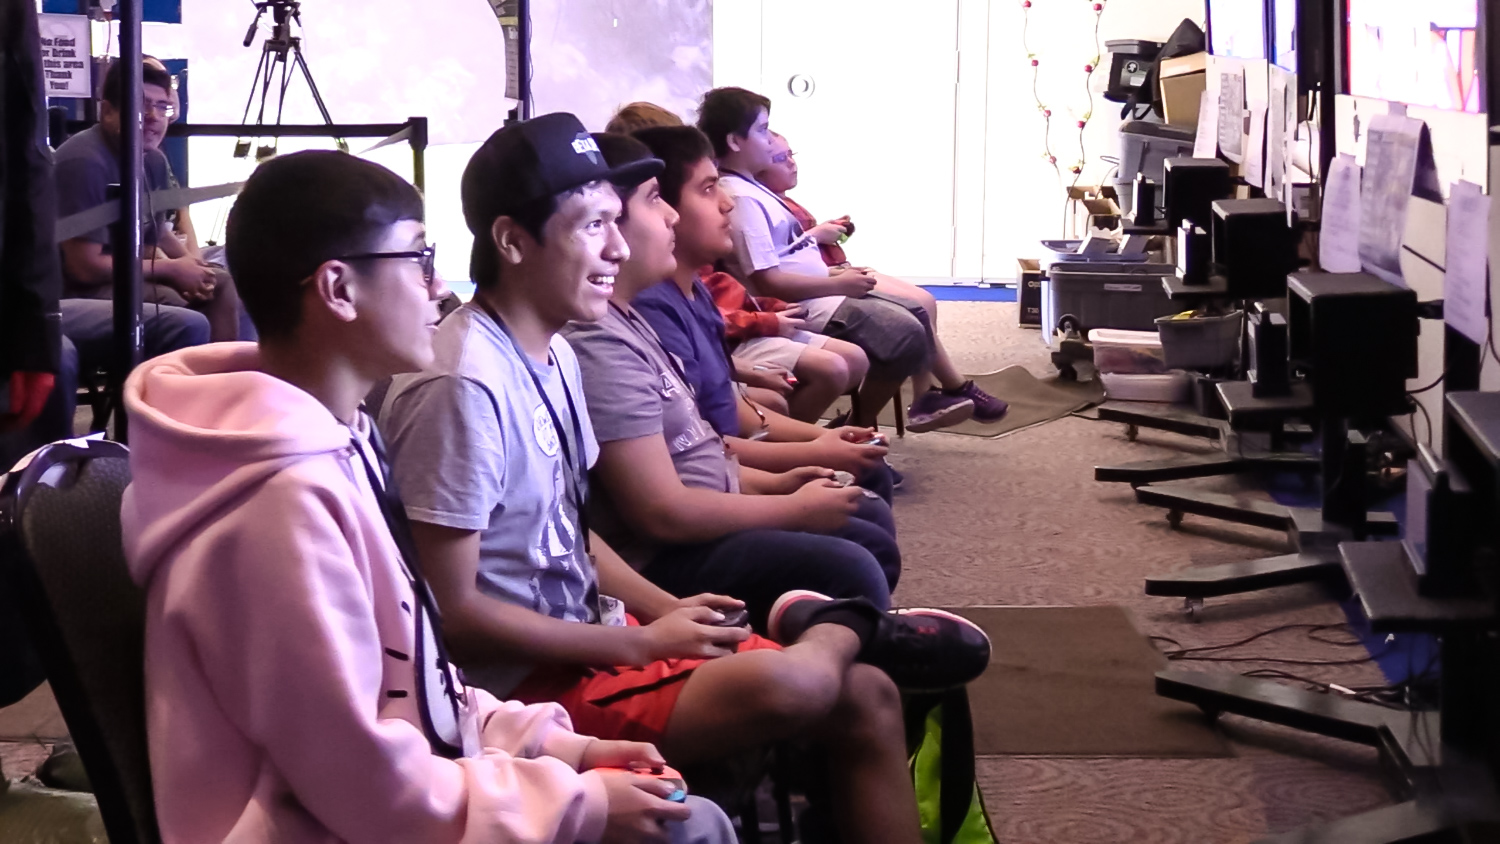 Super Smash Bros. Ultimate players battle at Smash-a-palooza at the Berry Center, in Cypress, Texas, July 27, 2019. (Cypress News Review photo by Creighton Holub)